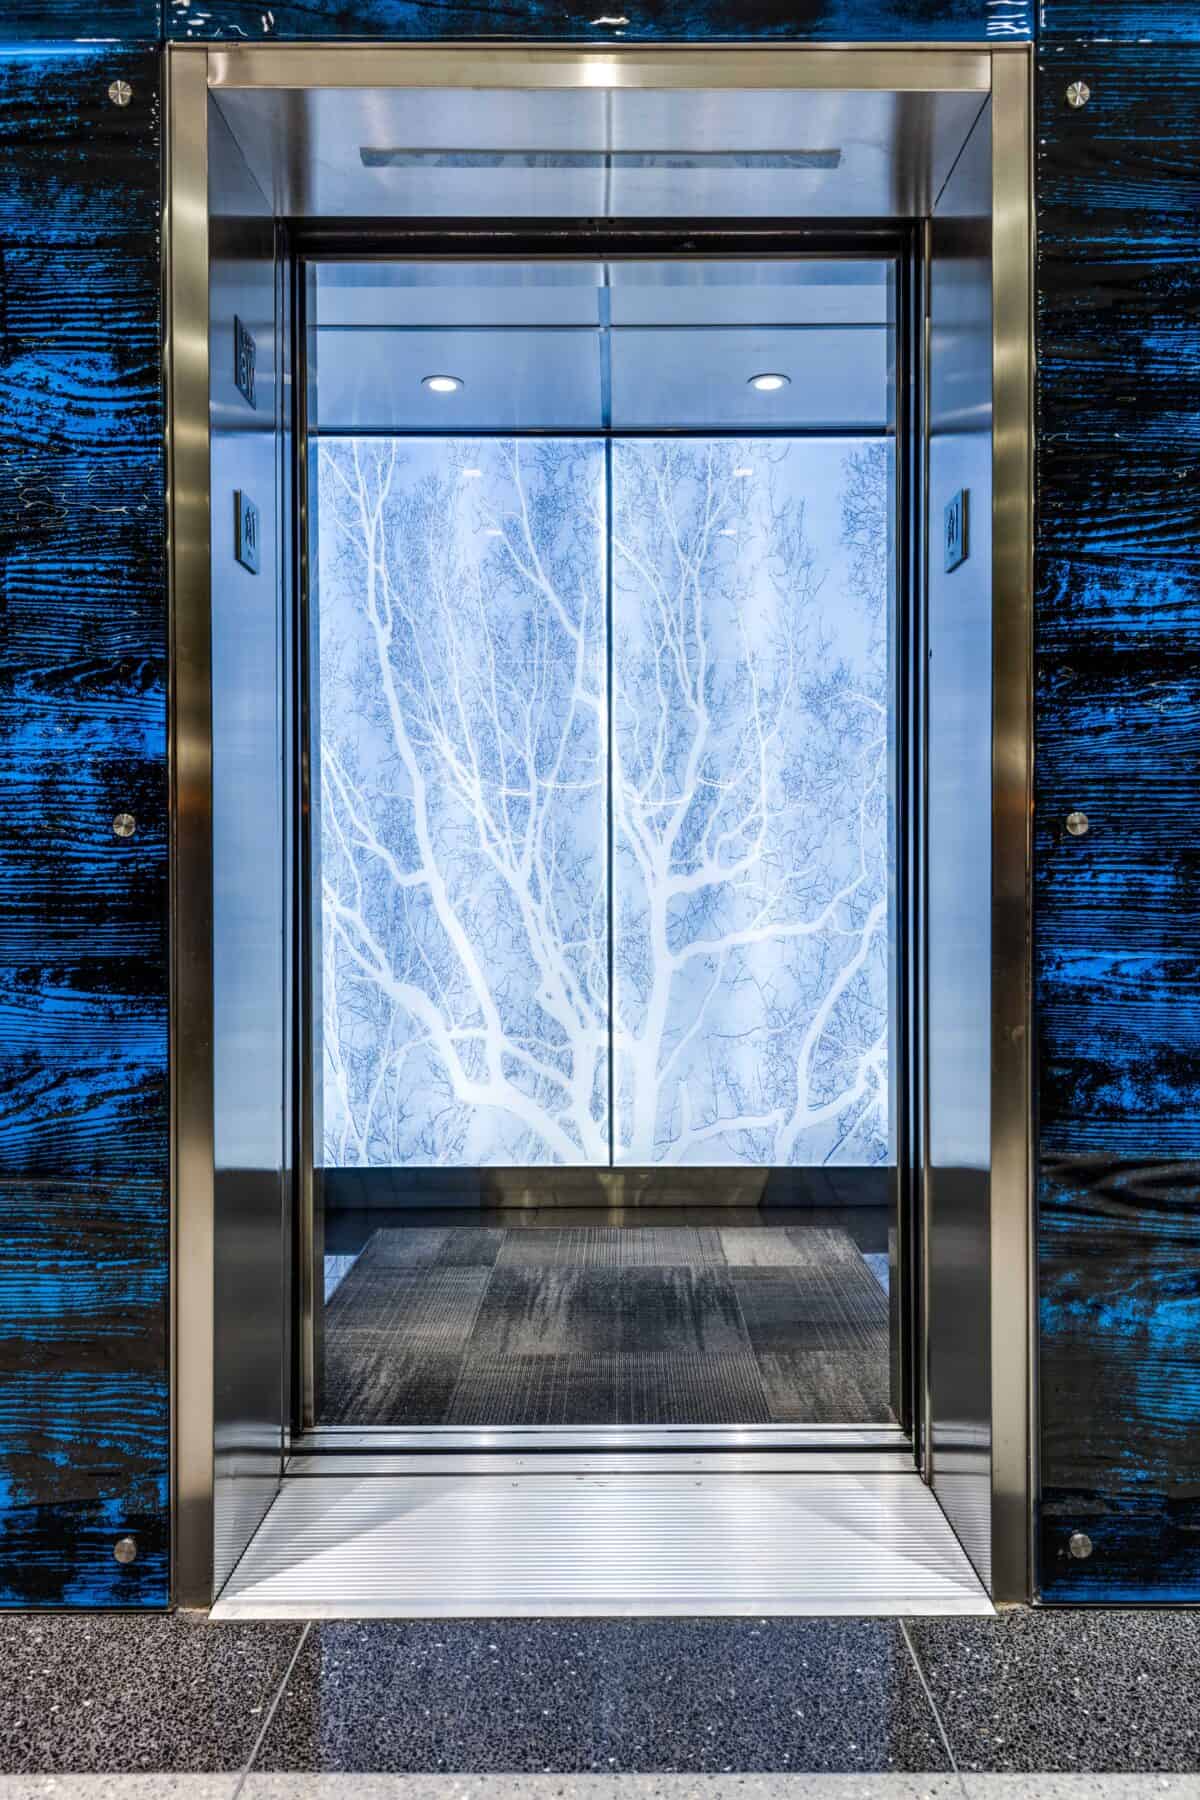 Michigan Lobby Remodel with Custom Blue Glass Wall and Back Lit Glass with Trees in the Elevator by Commercial Builder & General Contractor Structural Enterprises